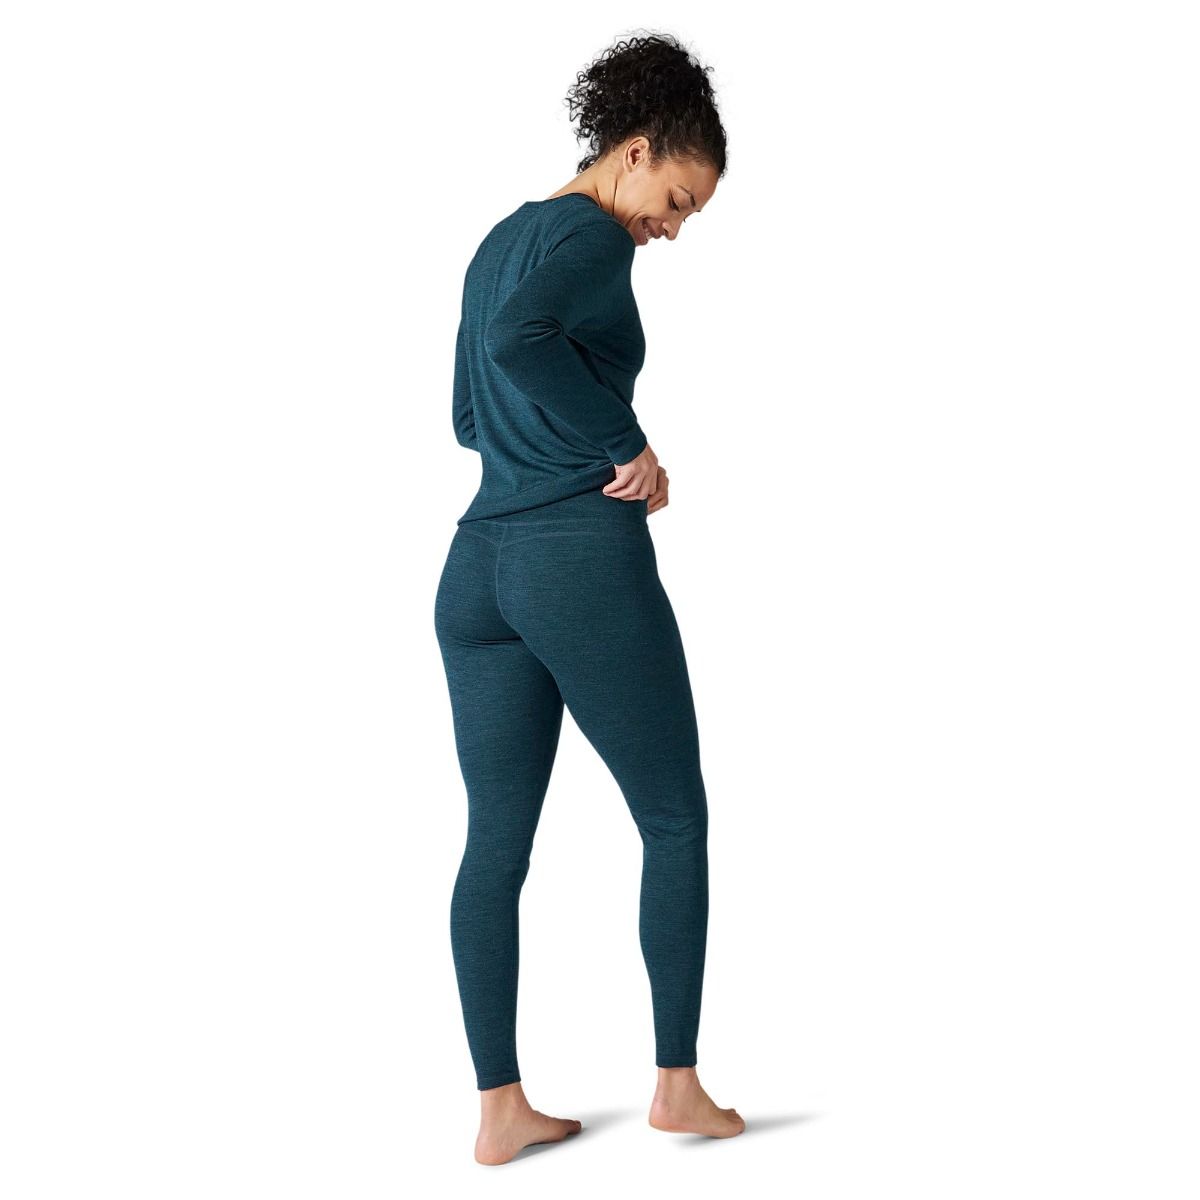 Take the Plunge: Why You Should Buy a Merino Wool Base Layer